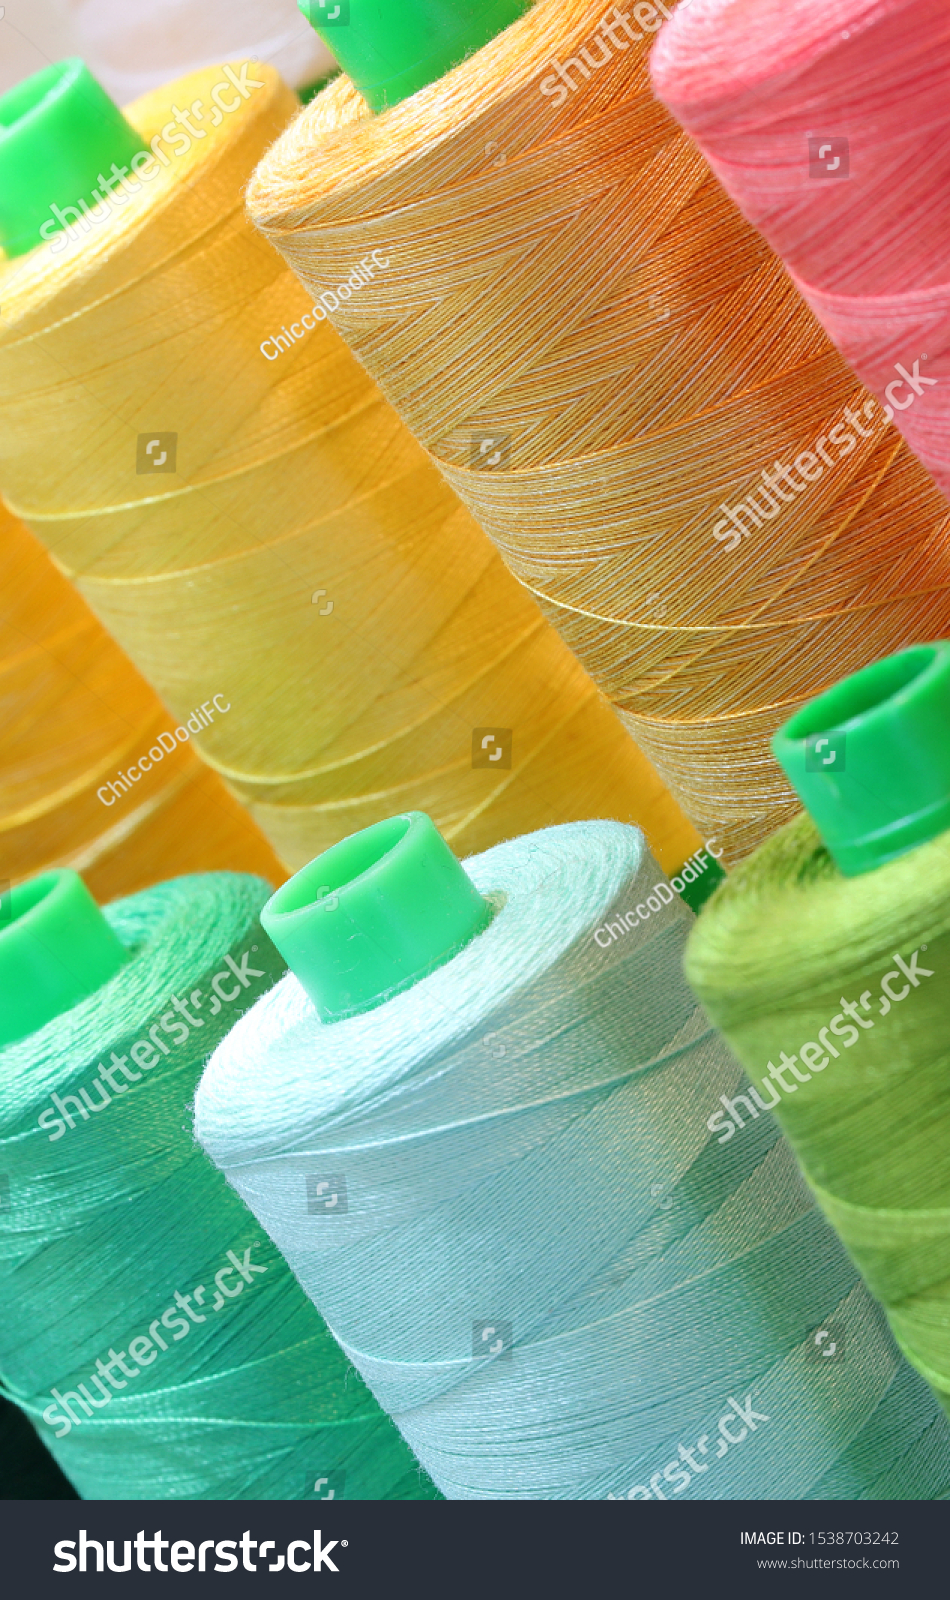 close-up detail of many colored spool of thread for sale #1538703242